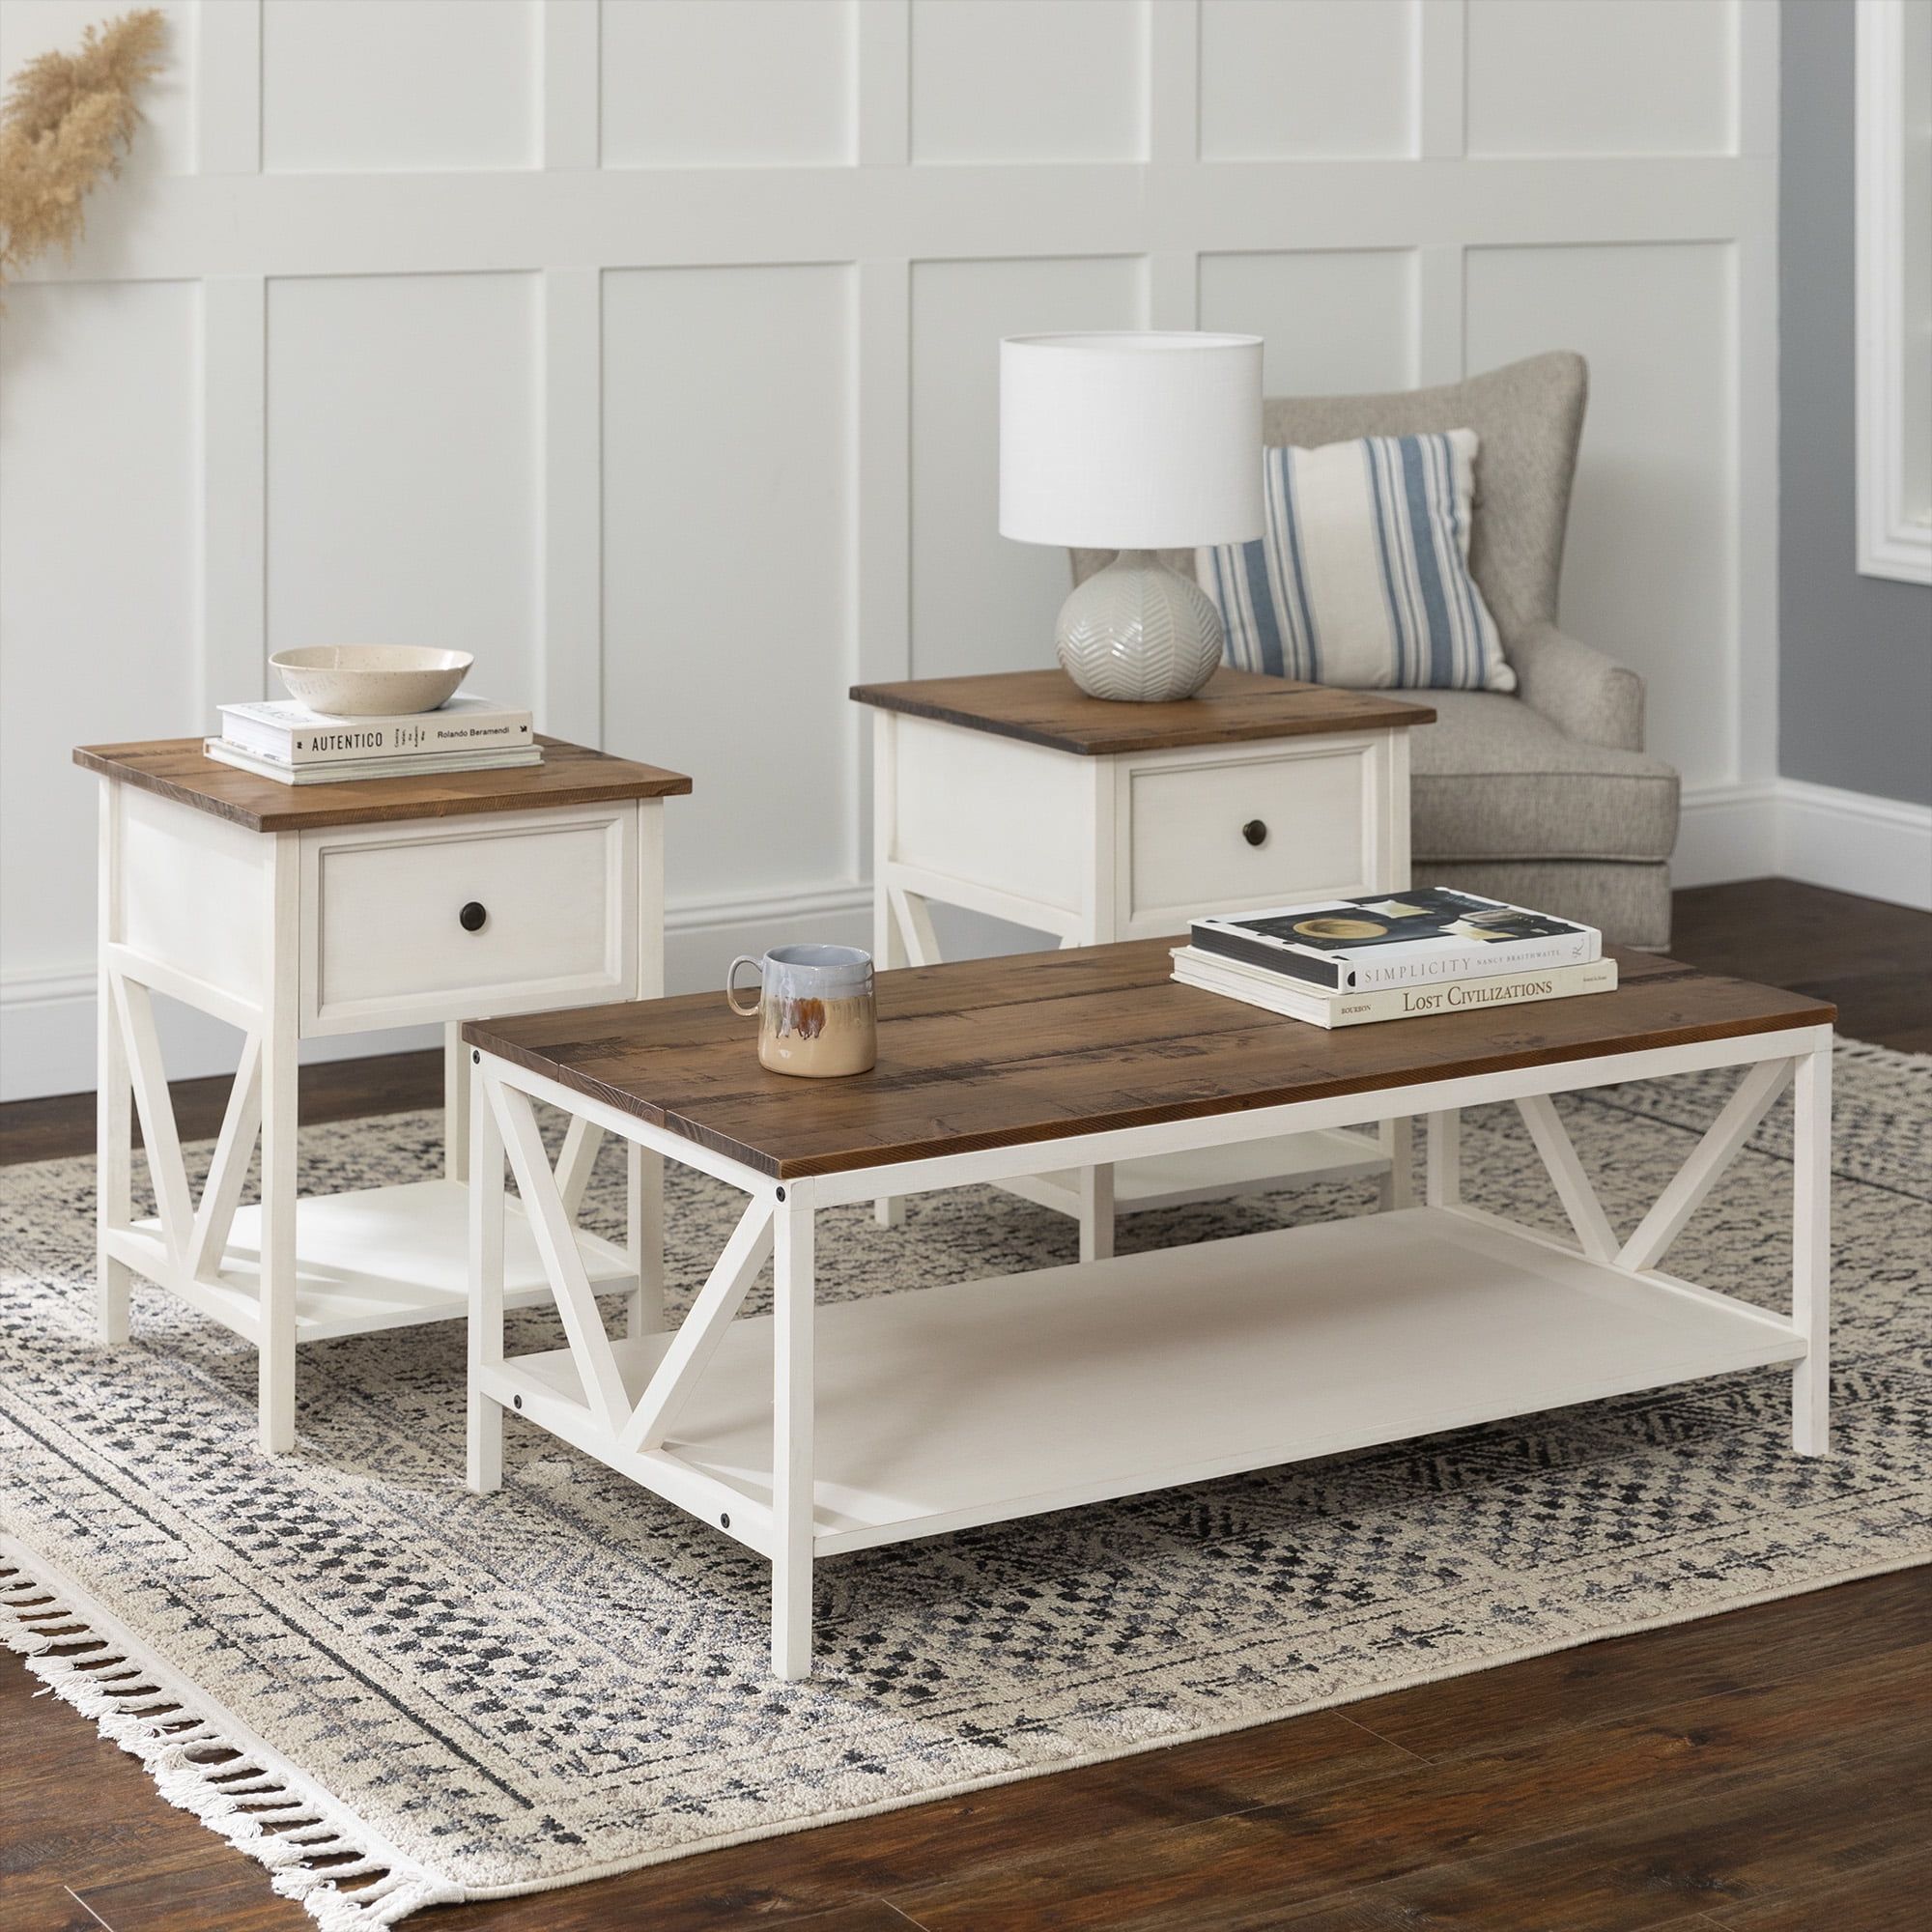 Modern Farmhouse Accent Table Set, Distressed White – Walmart Pertaining To Modern Farmhouse Coffee Table Sets (Gallery 4 of 20)